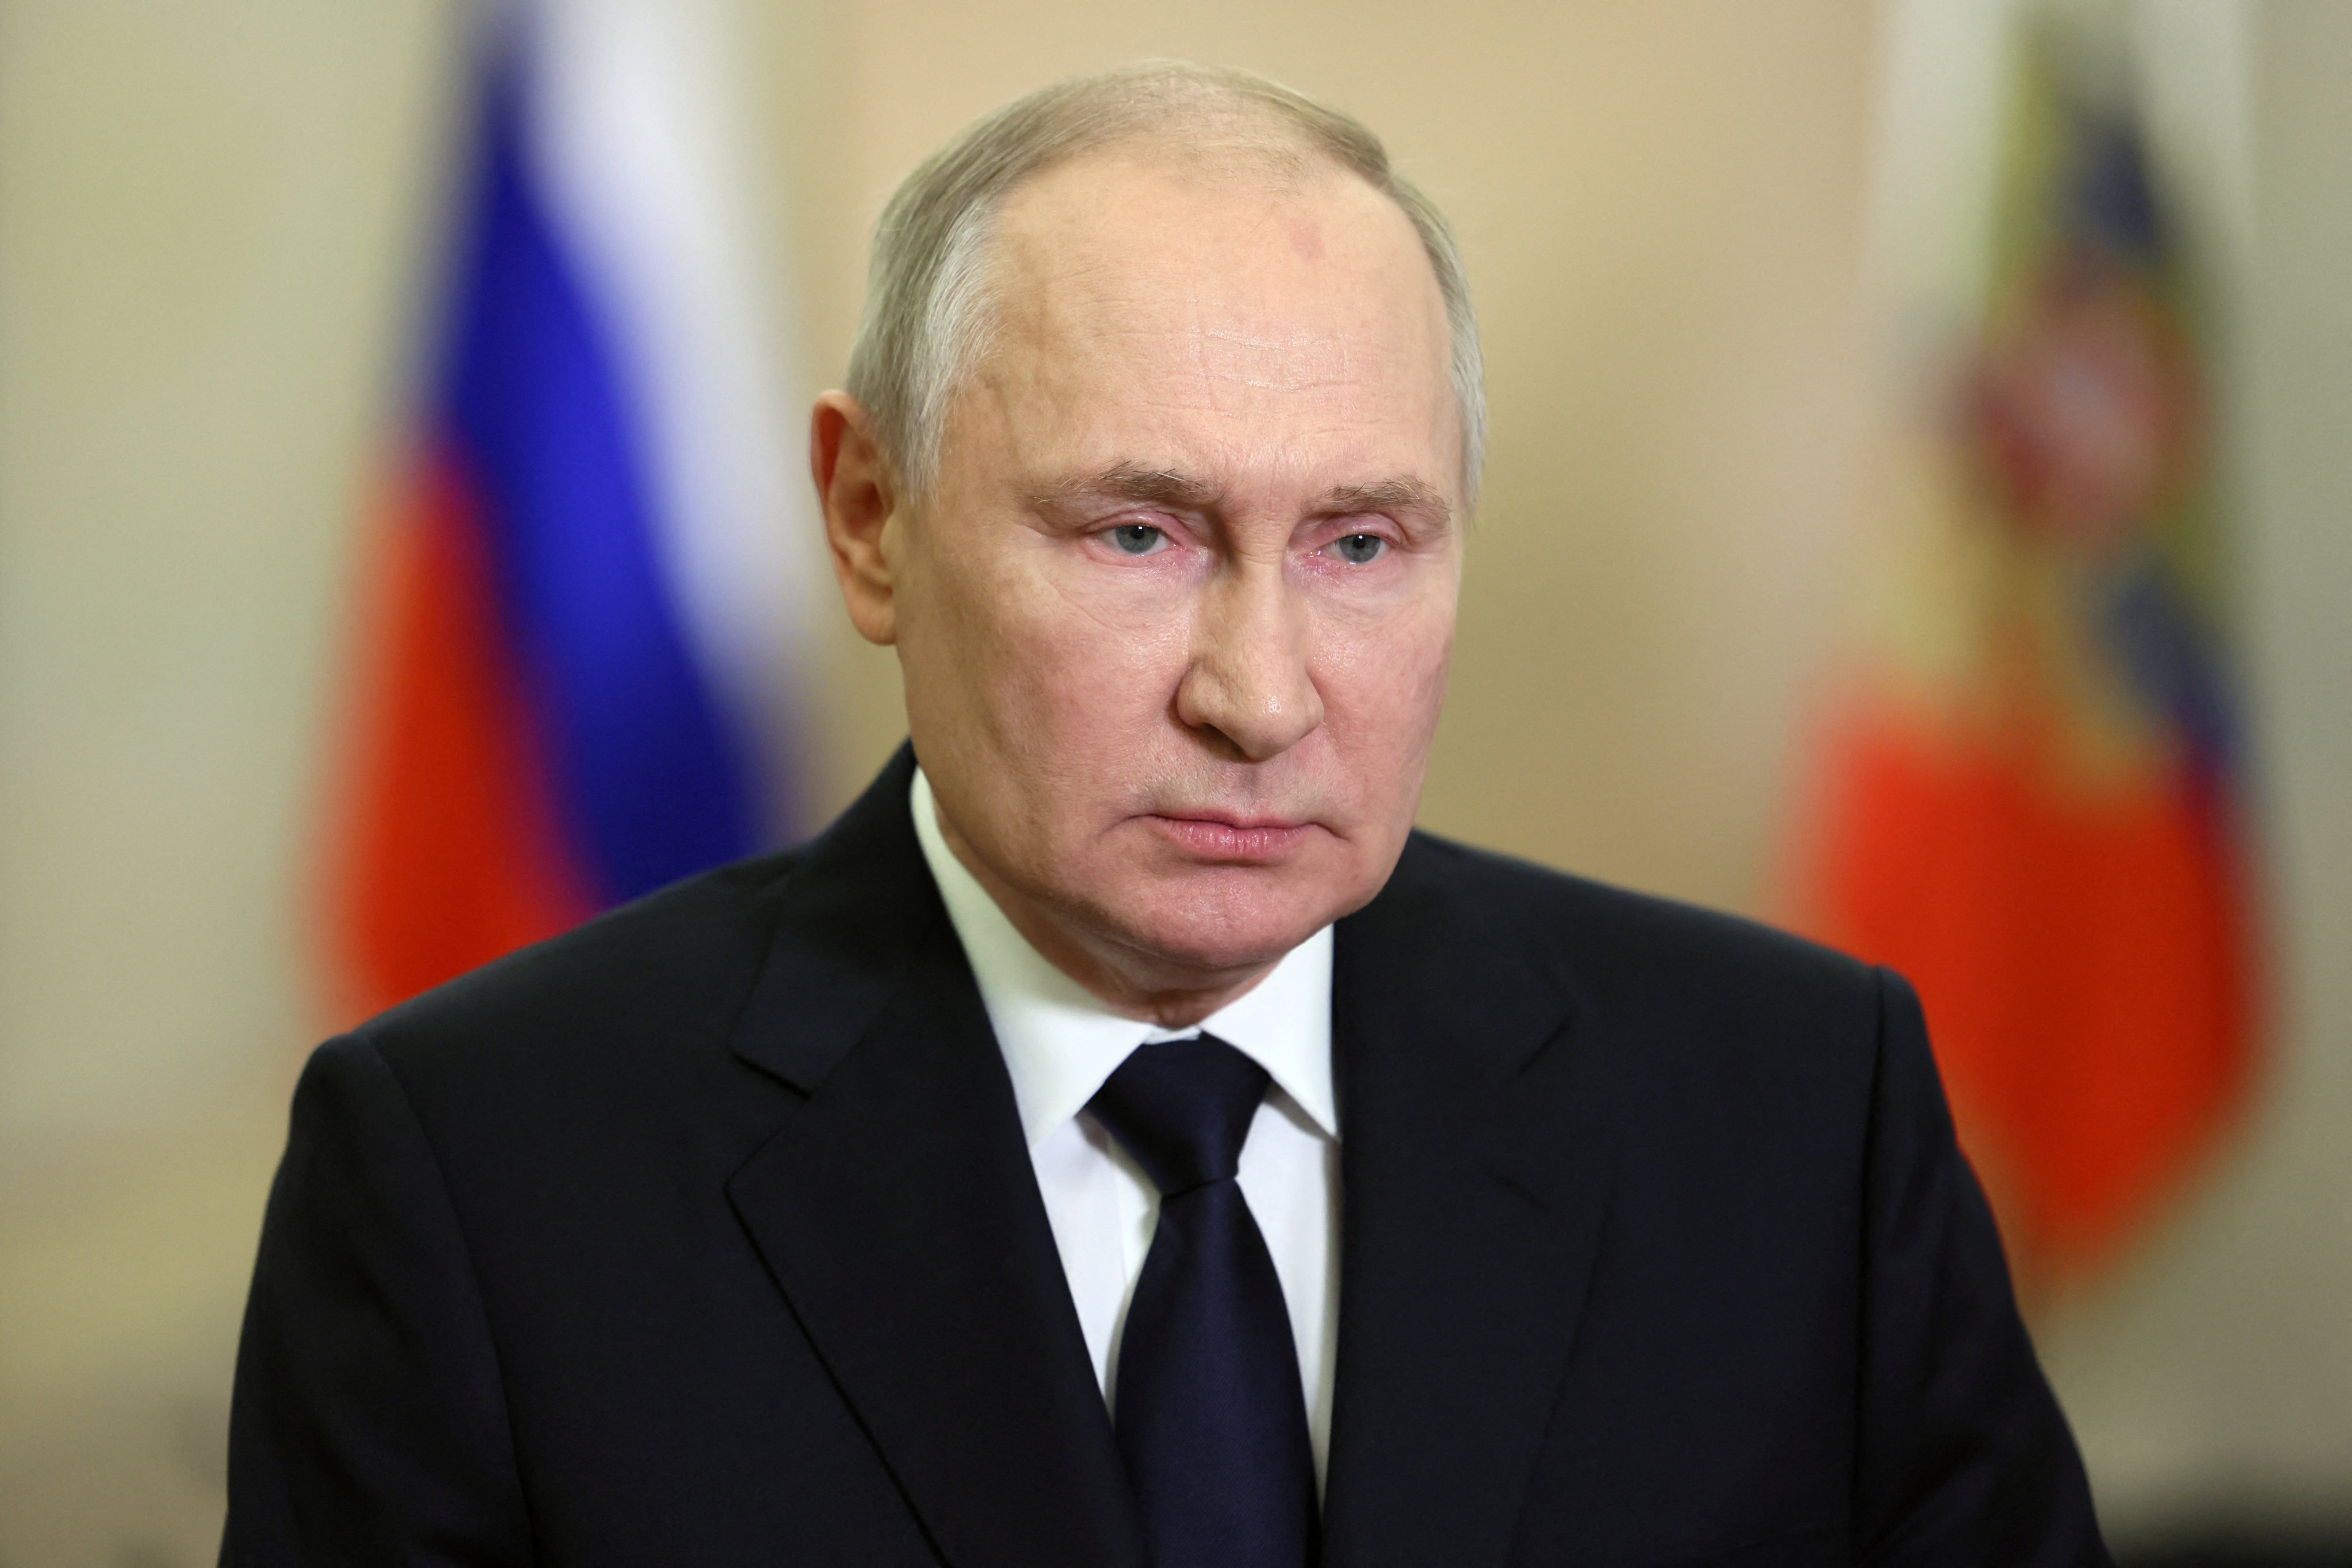 Russian President Vladimir Putin in a televised address on Saturday to mark his annexation of parts of Ukraine. Photo: via Reuters